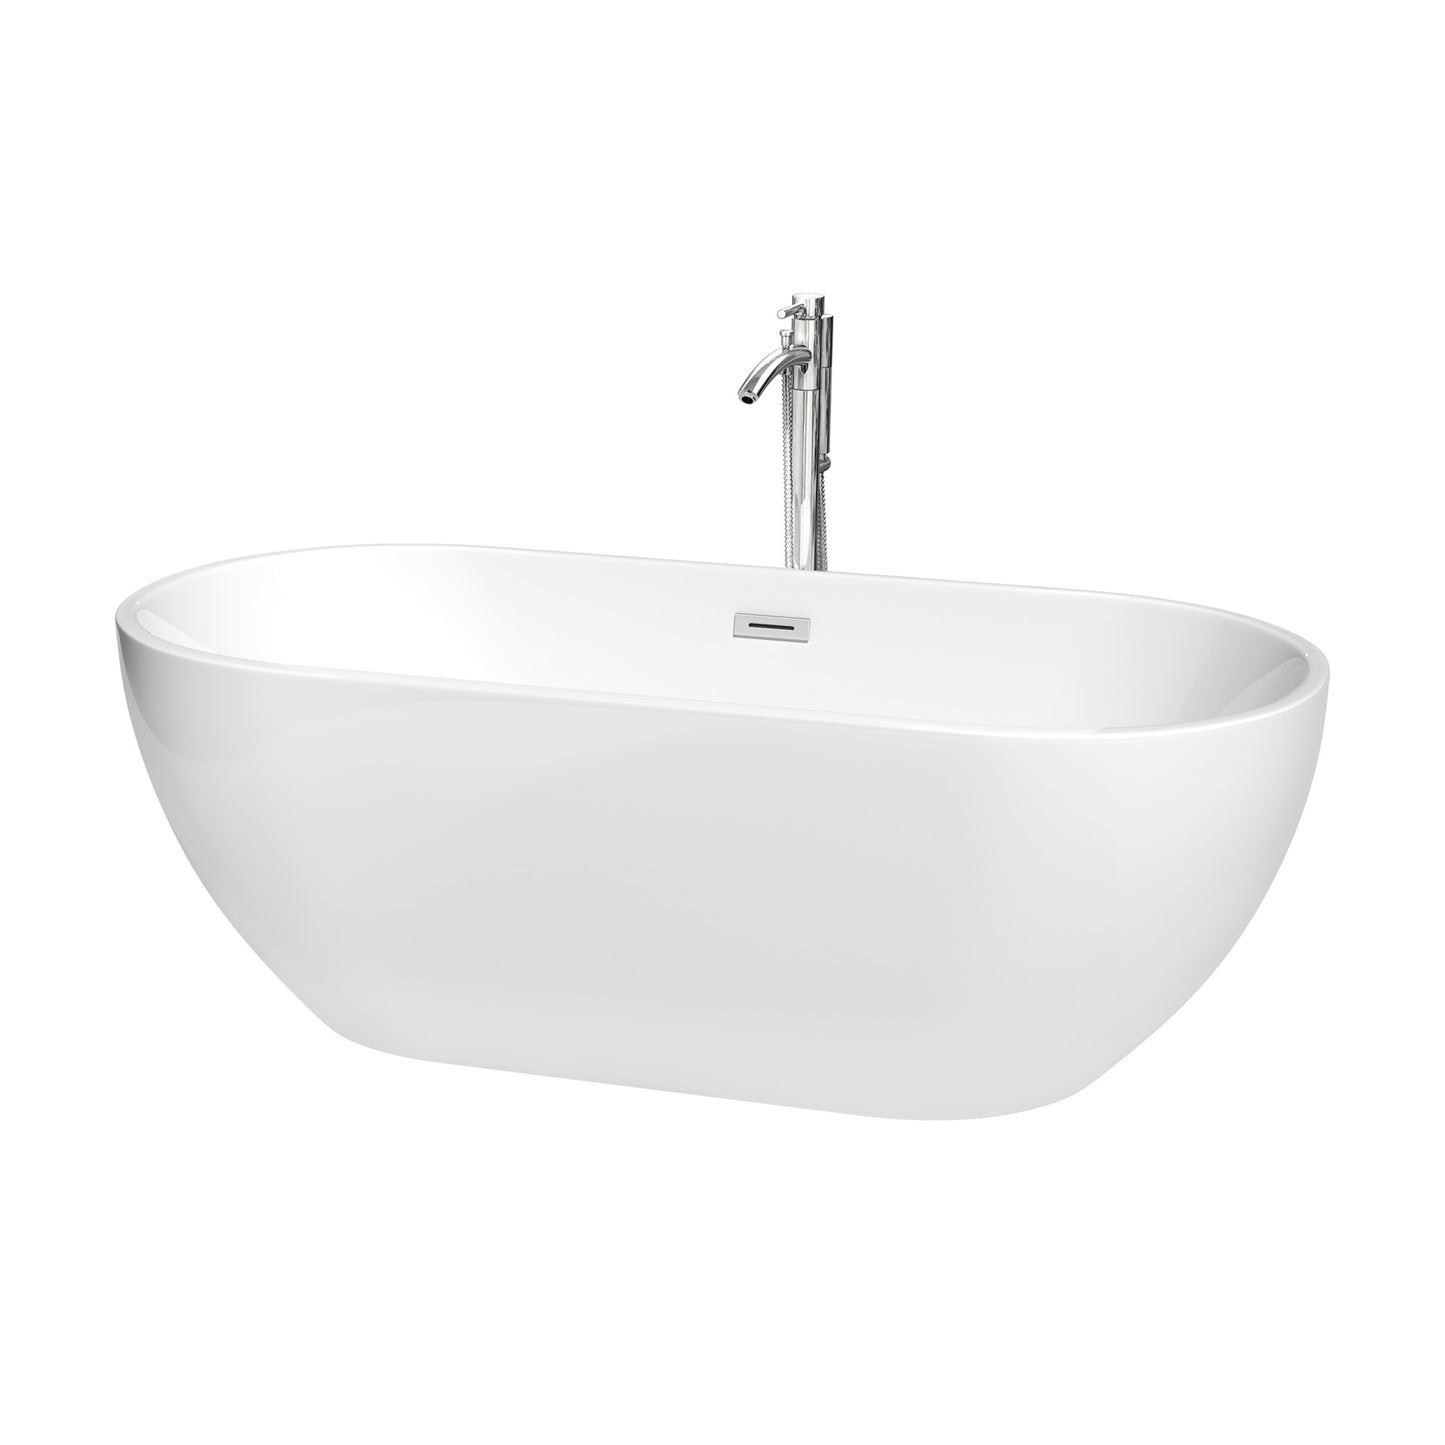 Wyndham Collection Brooklyn 67 Inch Freestanding Bathtub in White with Floor Mounted Faucet, Drain and Overflow Trim - Luxe Bathroom Vanities